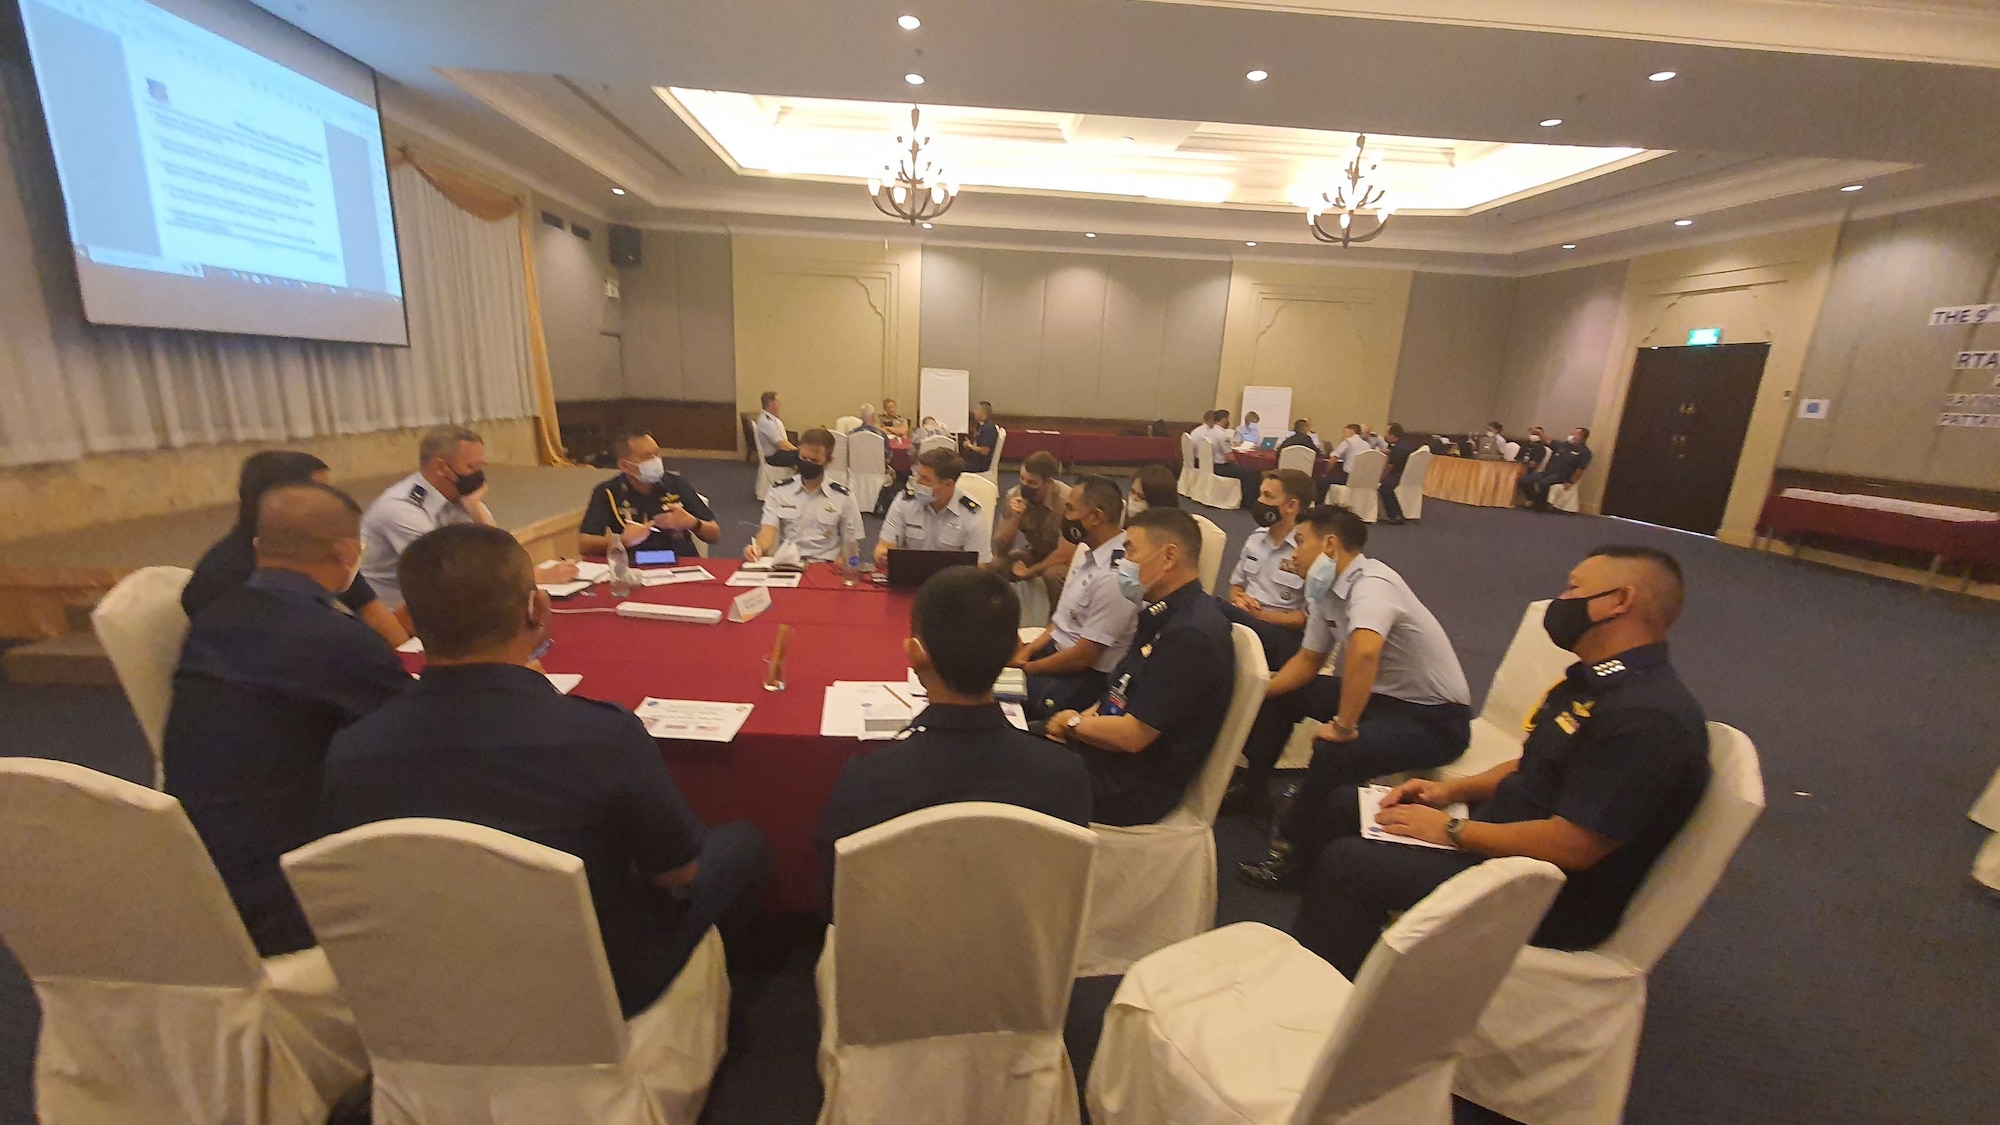 Airmen from Pacific Air Forces, the Washington Air National Guard and the Royal Thai Air Force have breakout group discussions during the ninth annual Airman-to-Airman Talks, Pattaya, Thailand, July 29, 2022. Thailand is the United States’ oldest ally in Asia, going on 204 years since the two countries made initial contact between the King of Siam and the president of the United States, resulting in more than two centuries of friendship between the two nations. (Courtesy photo)